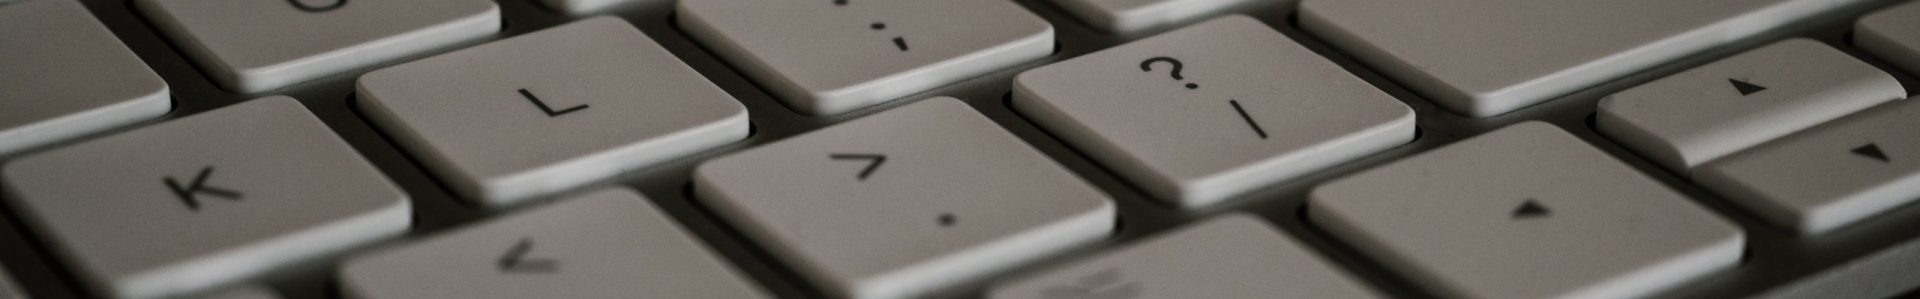 Use your Mac as a Bluetooth Keyboard